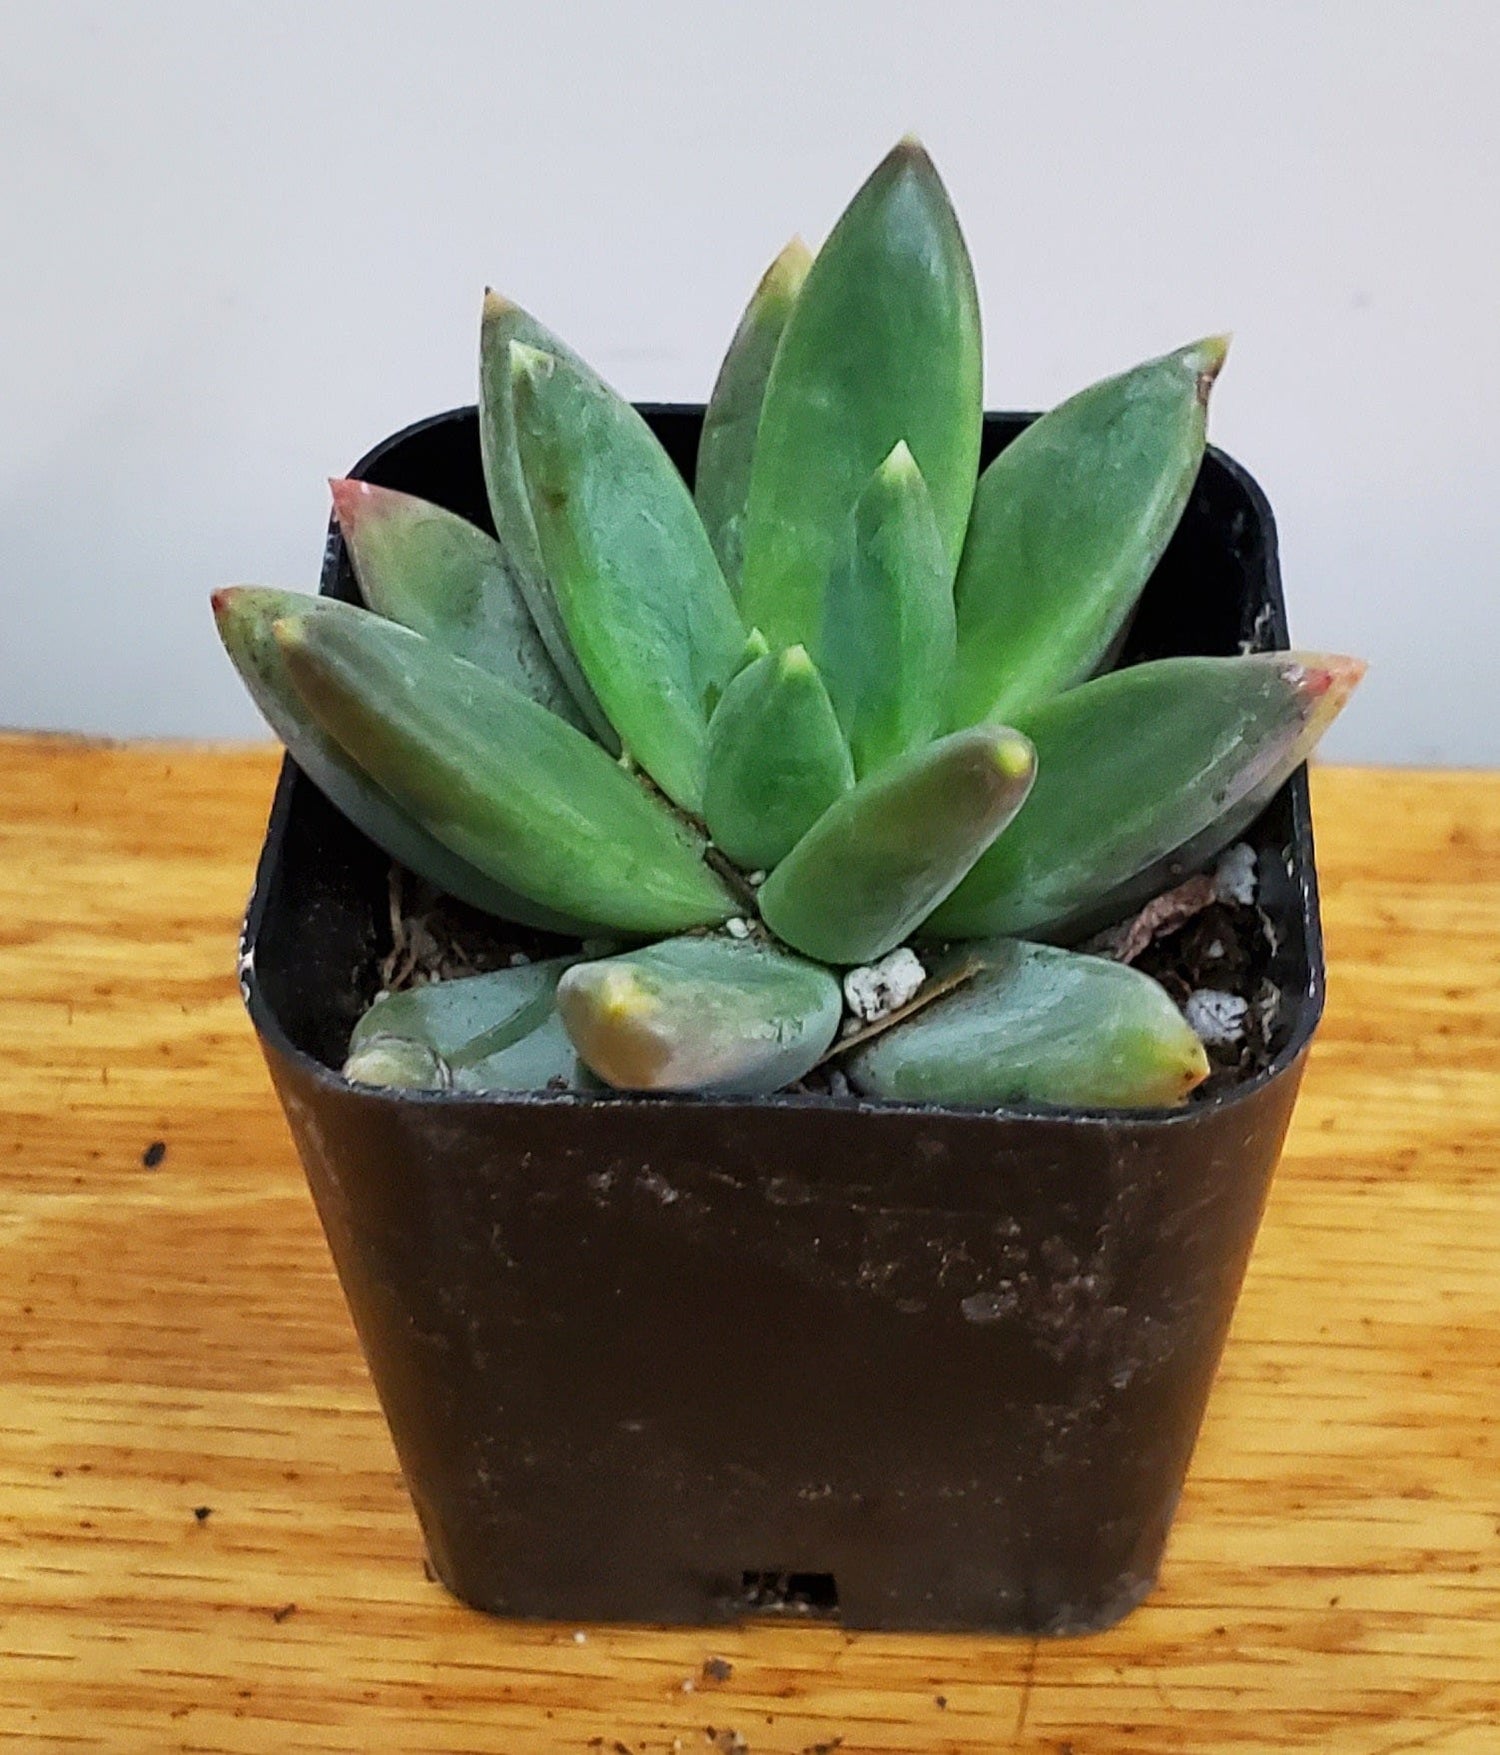 Urban Sprouts Plant 2" in nursery pot Succulent 'Bea'